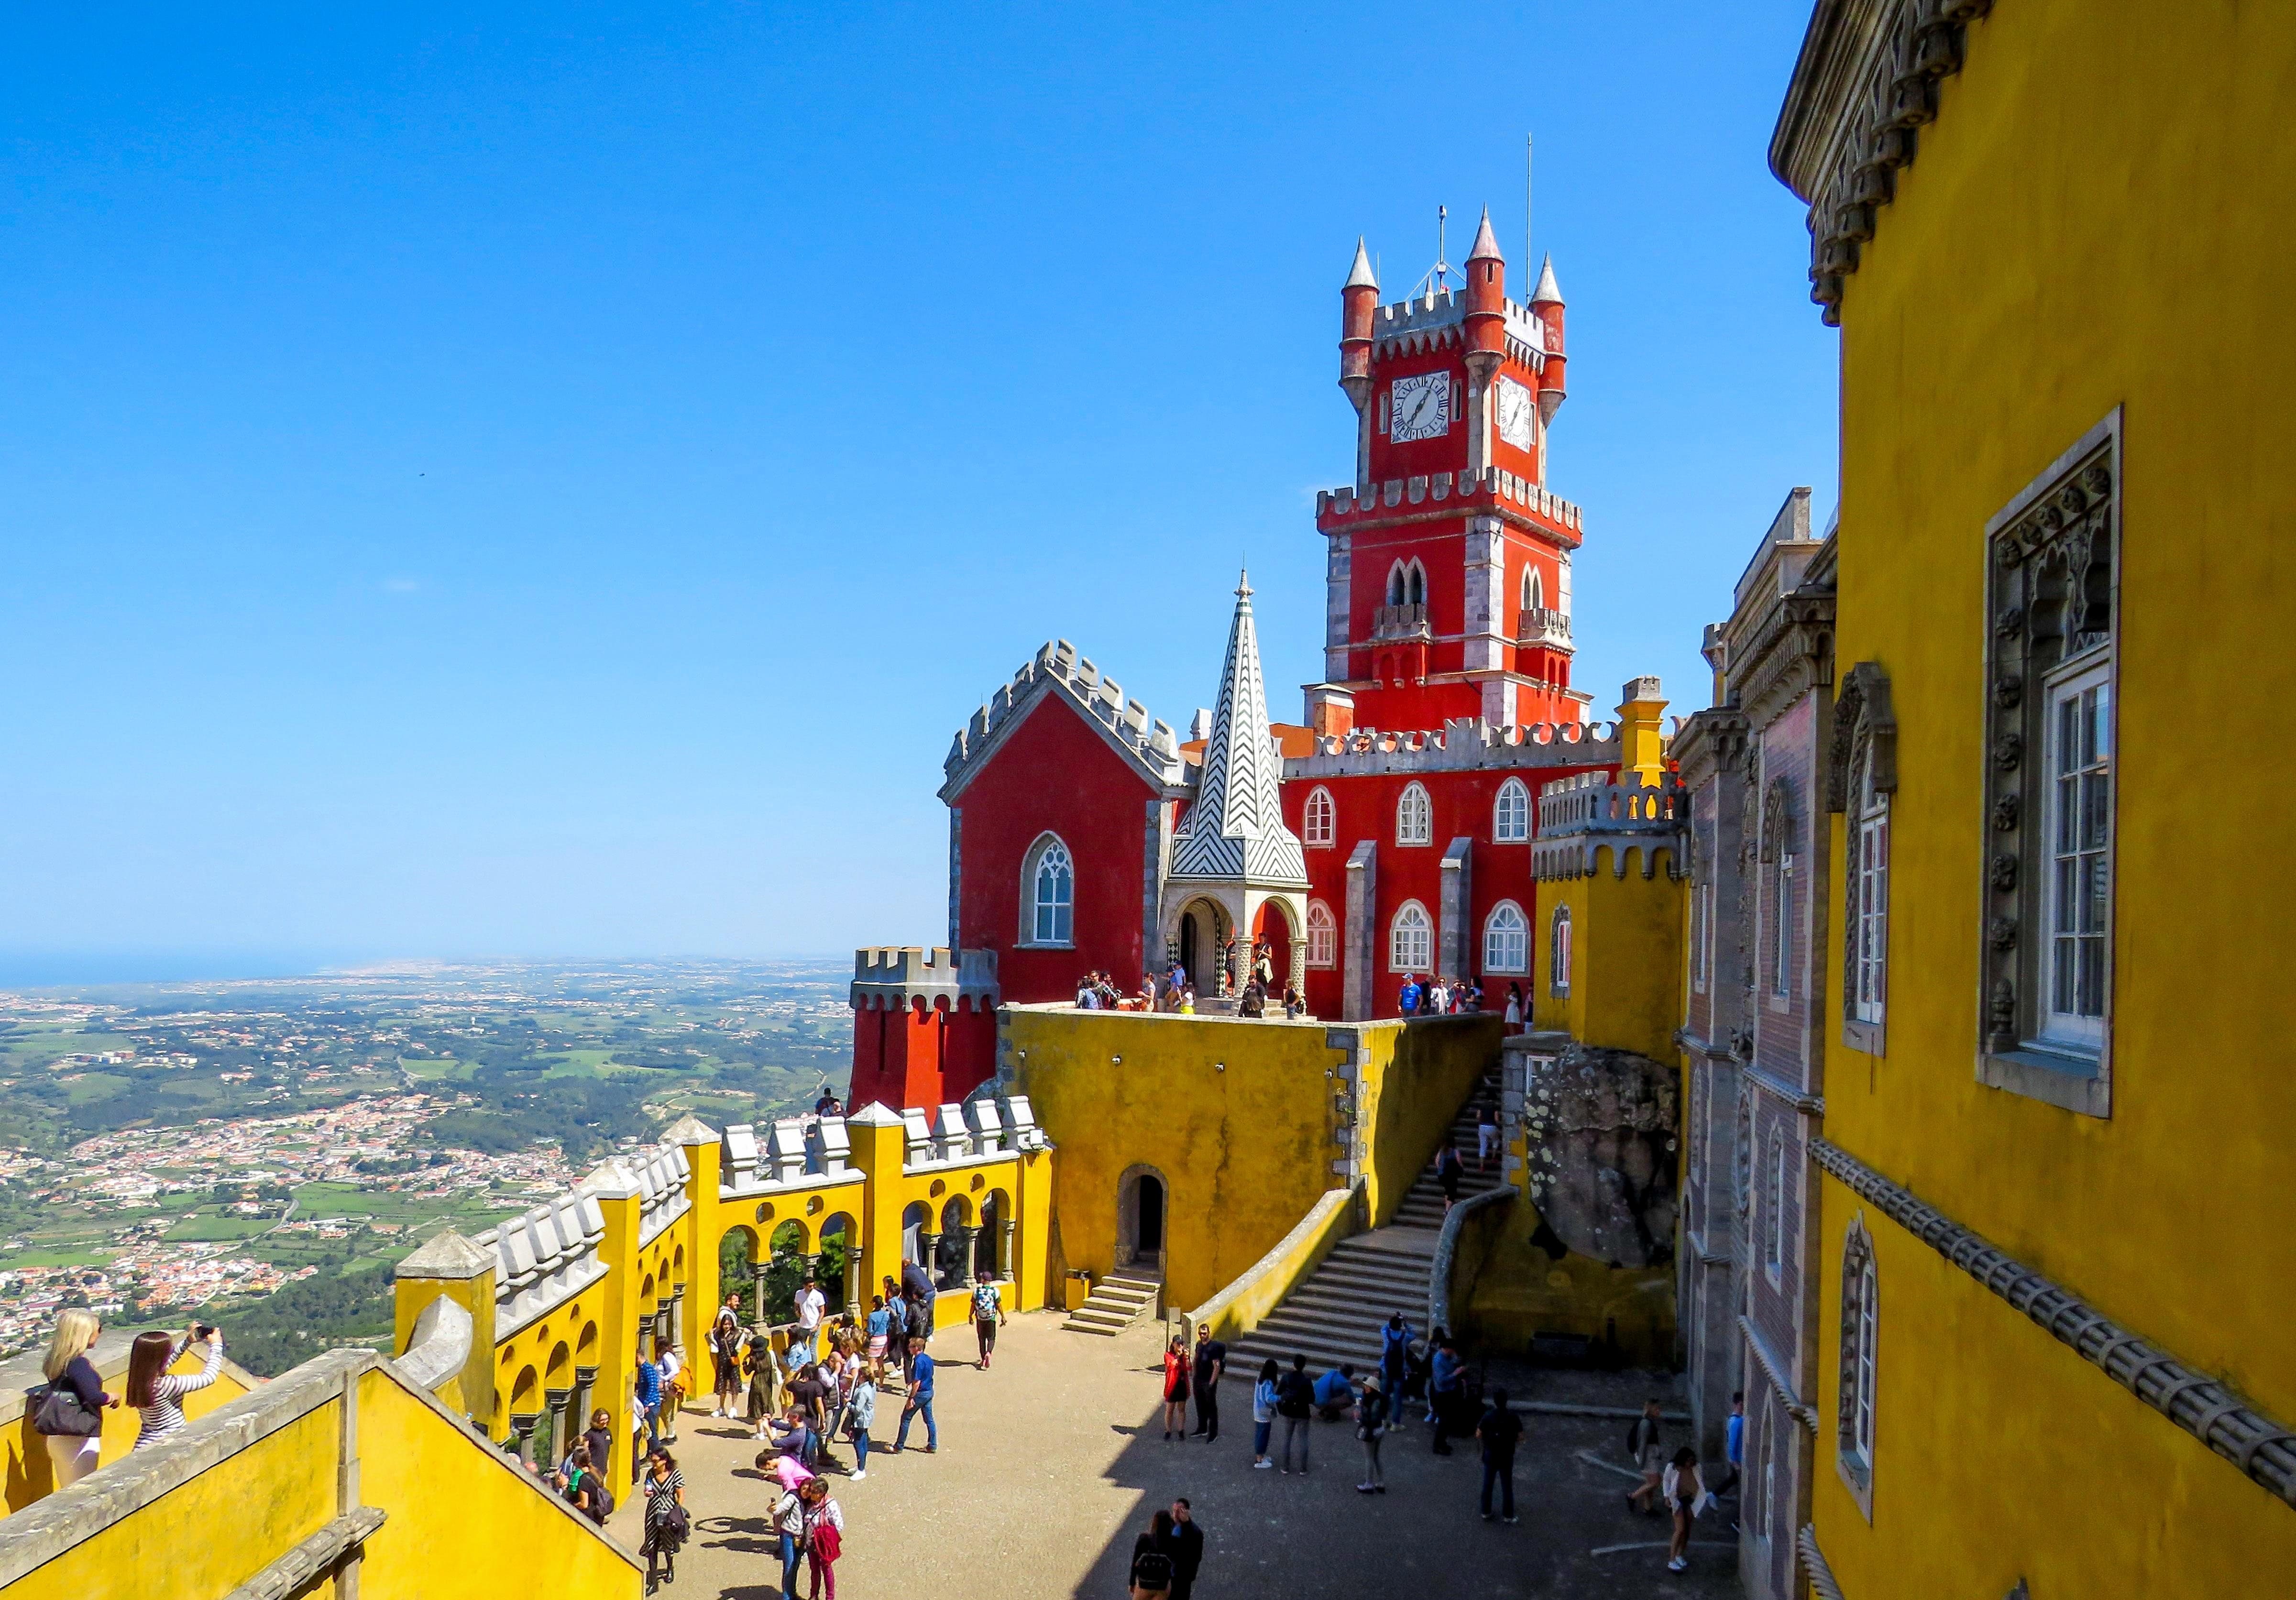 How to get to Pena Palace